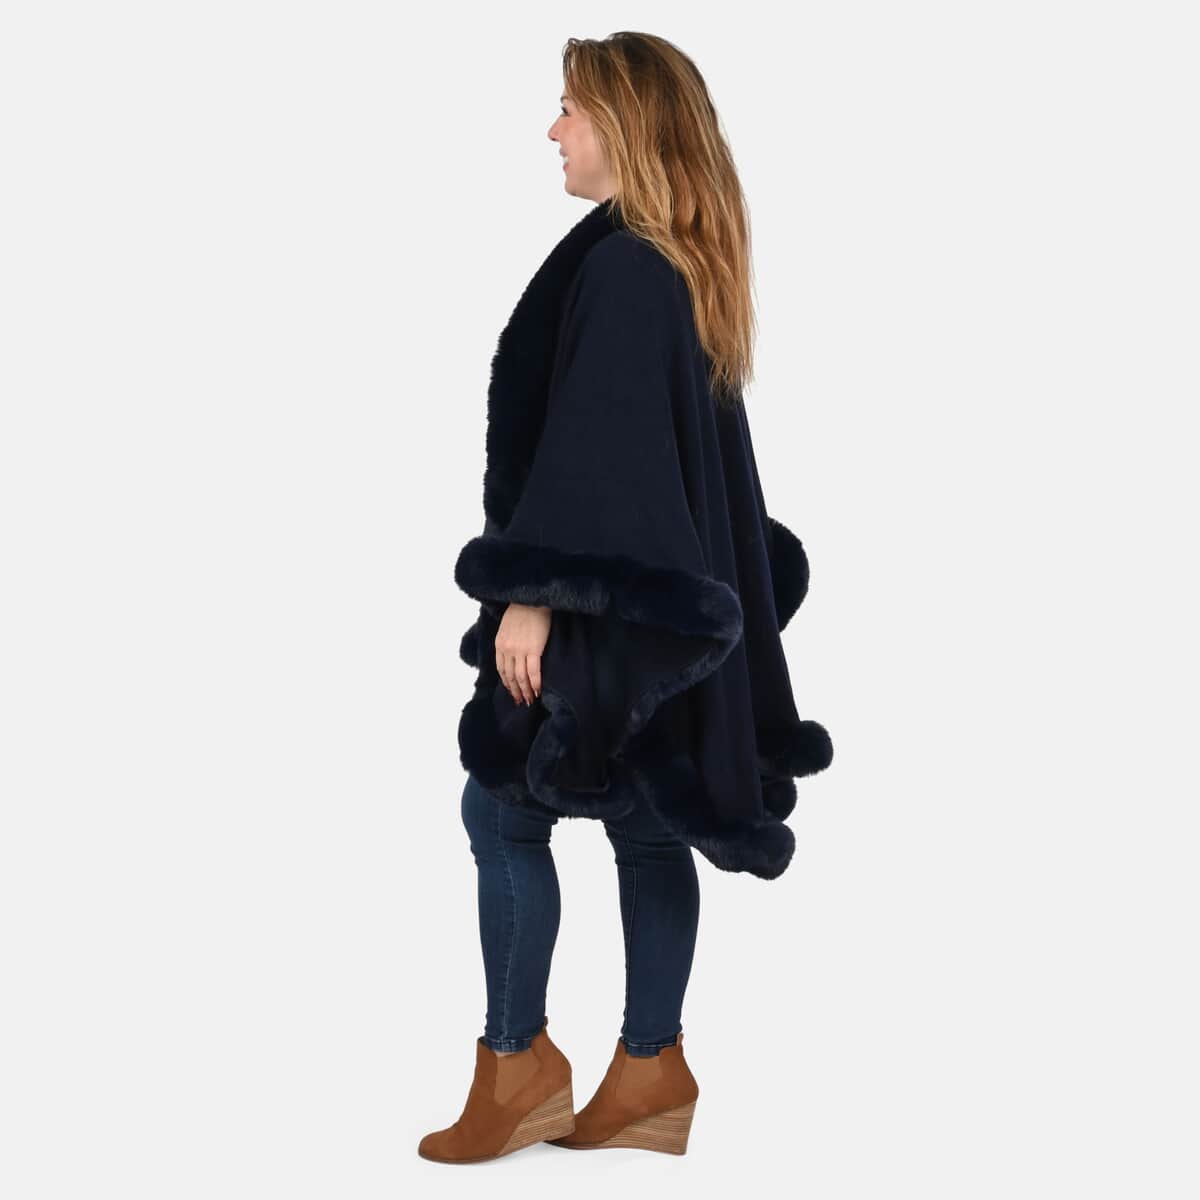 Designer Inspired Navy Ruana with Faux Fur Trim - One Size Fits Most image number 2